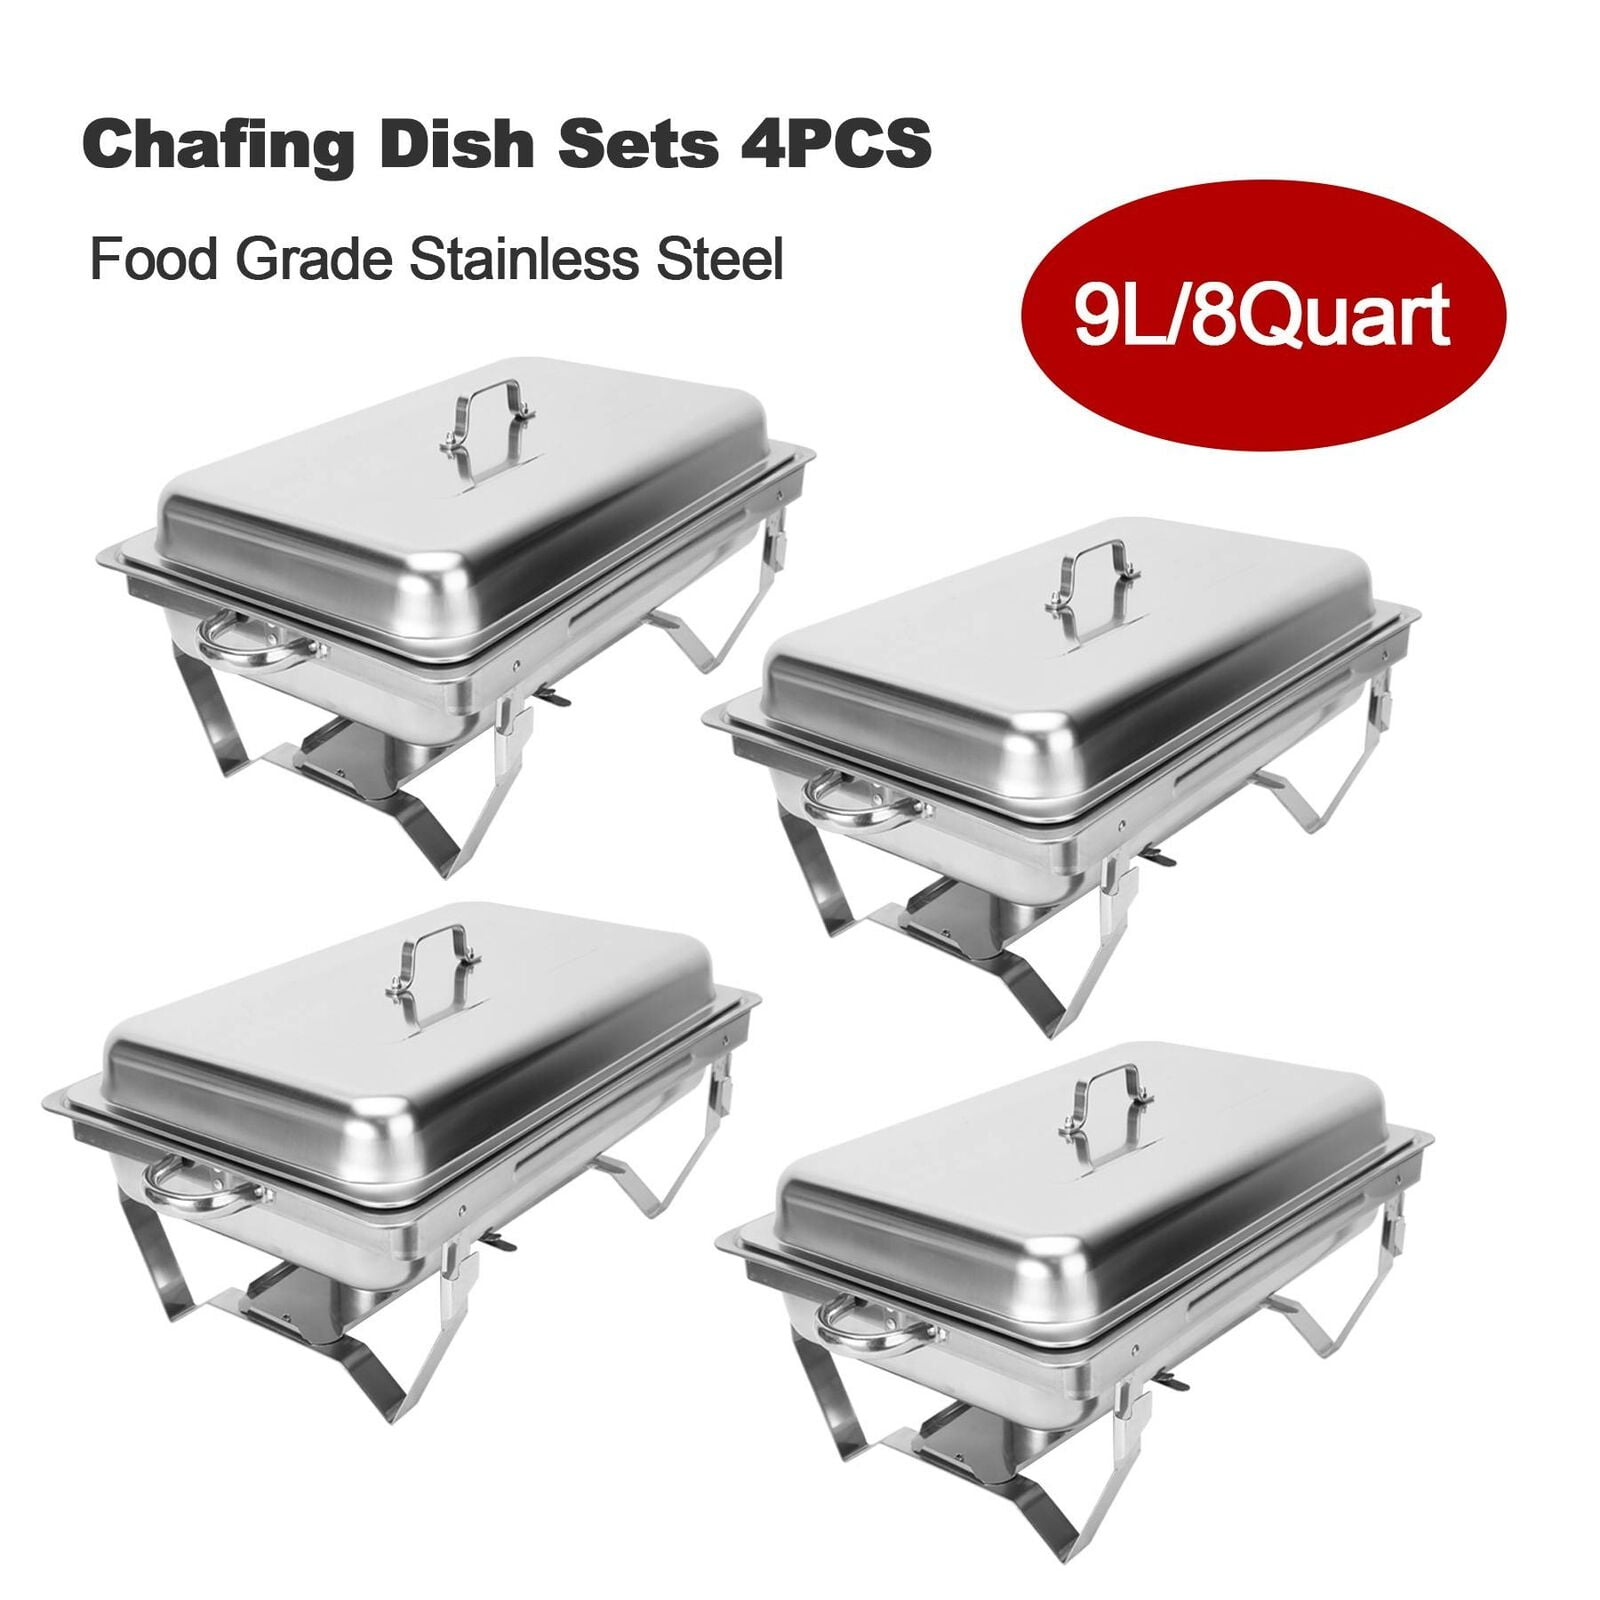 9L PACK OF 2 STAINLESS STEEL LARGE CHAFING DISH SETS SPOONS WITH FOOD PANS FUEL 